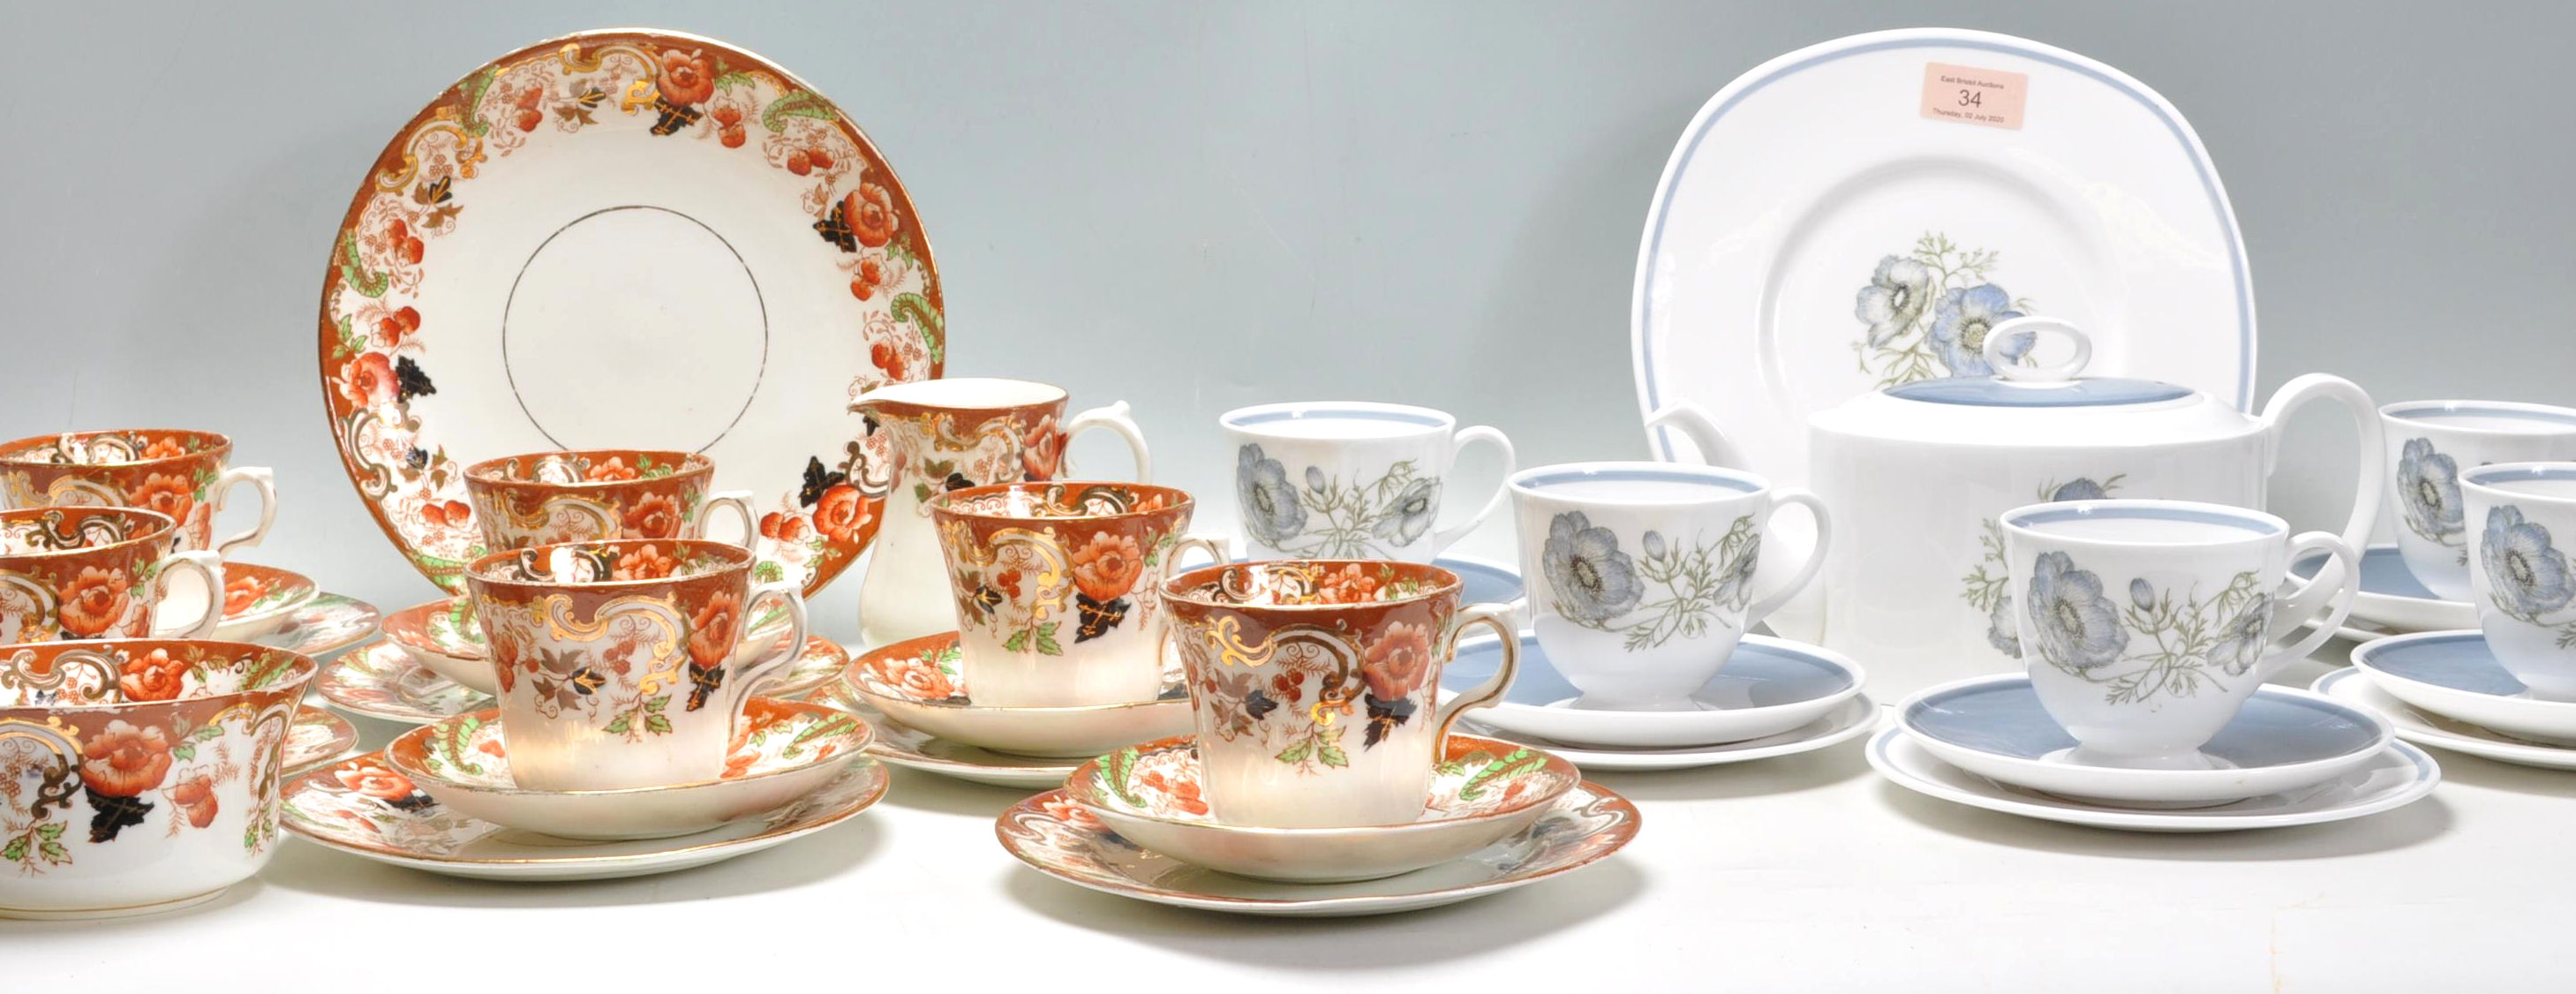 A 19th Century Victorian Imari pattern tea service having transfer printed floral decoration with